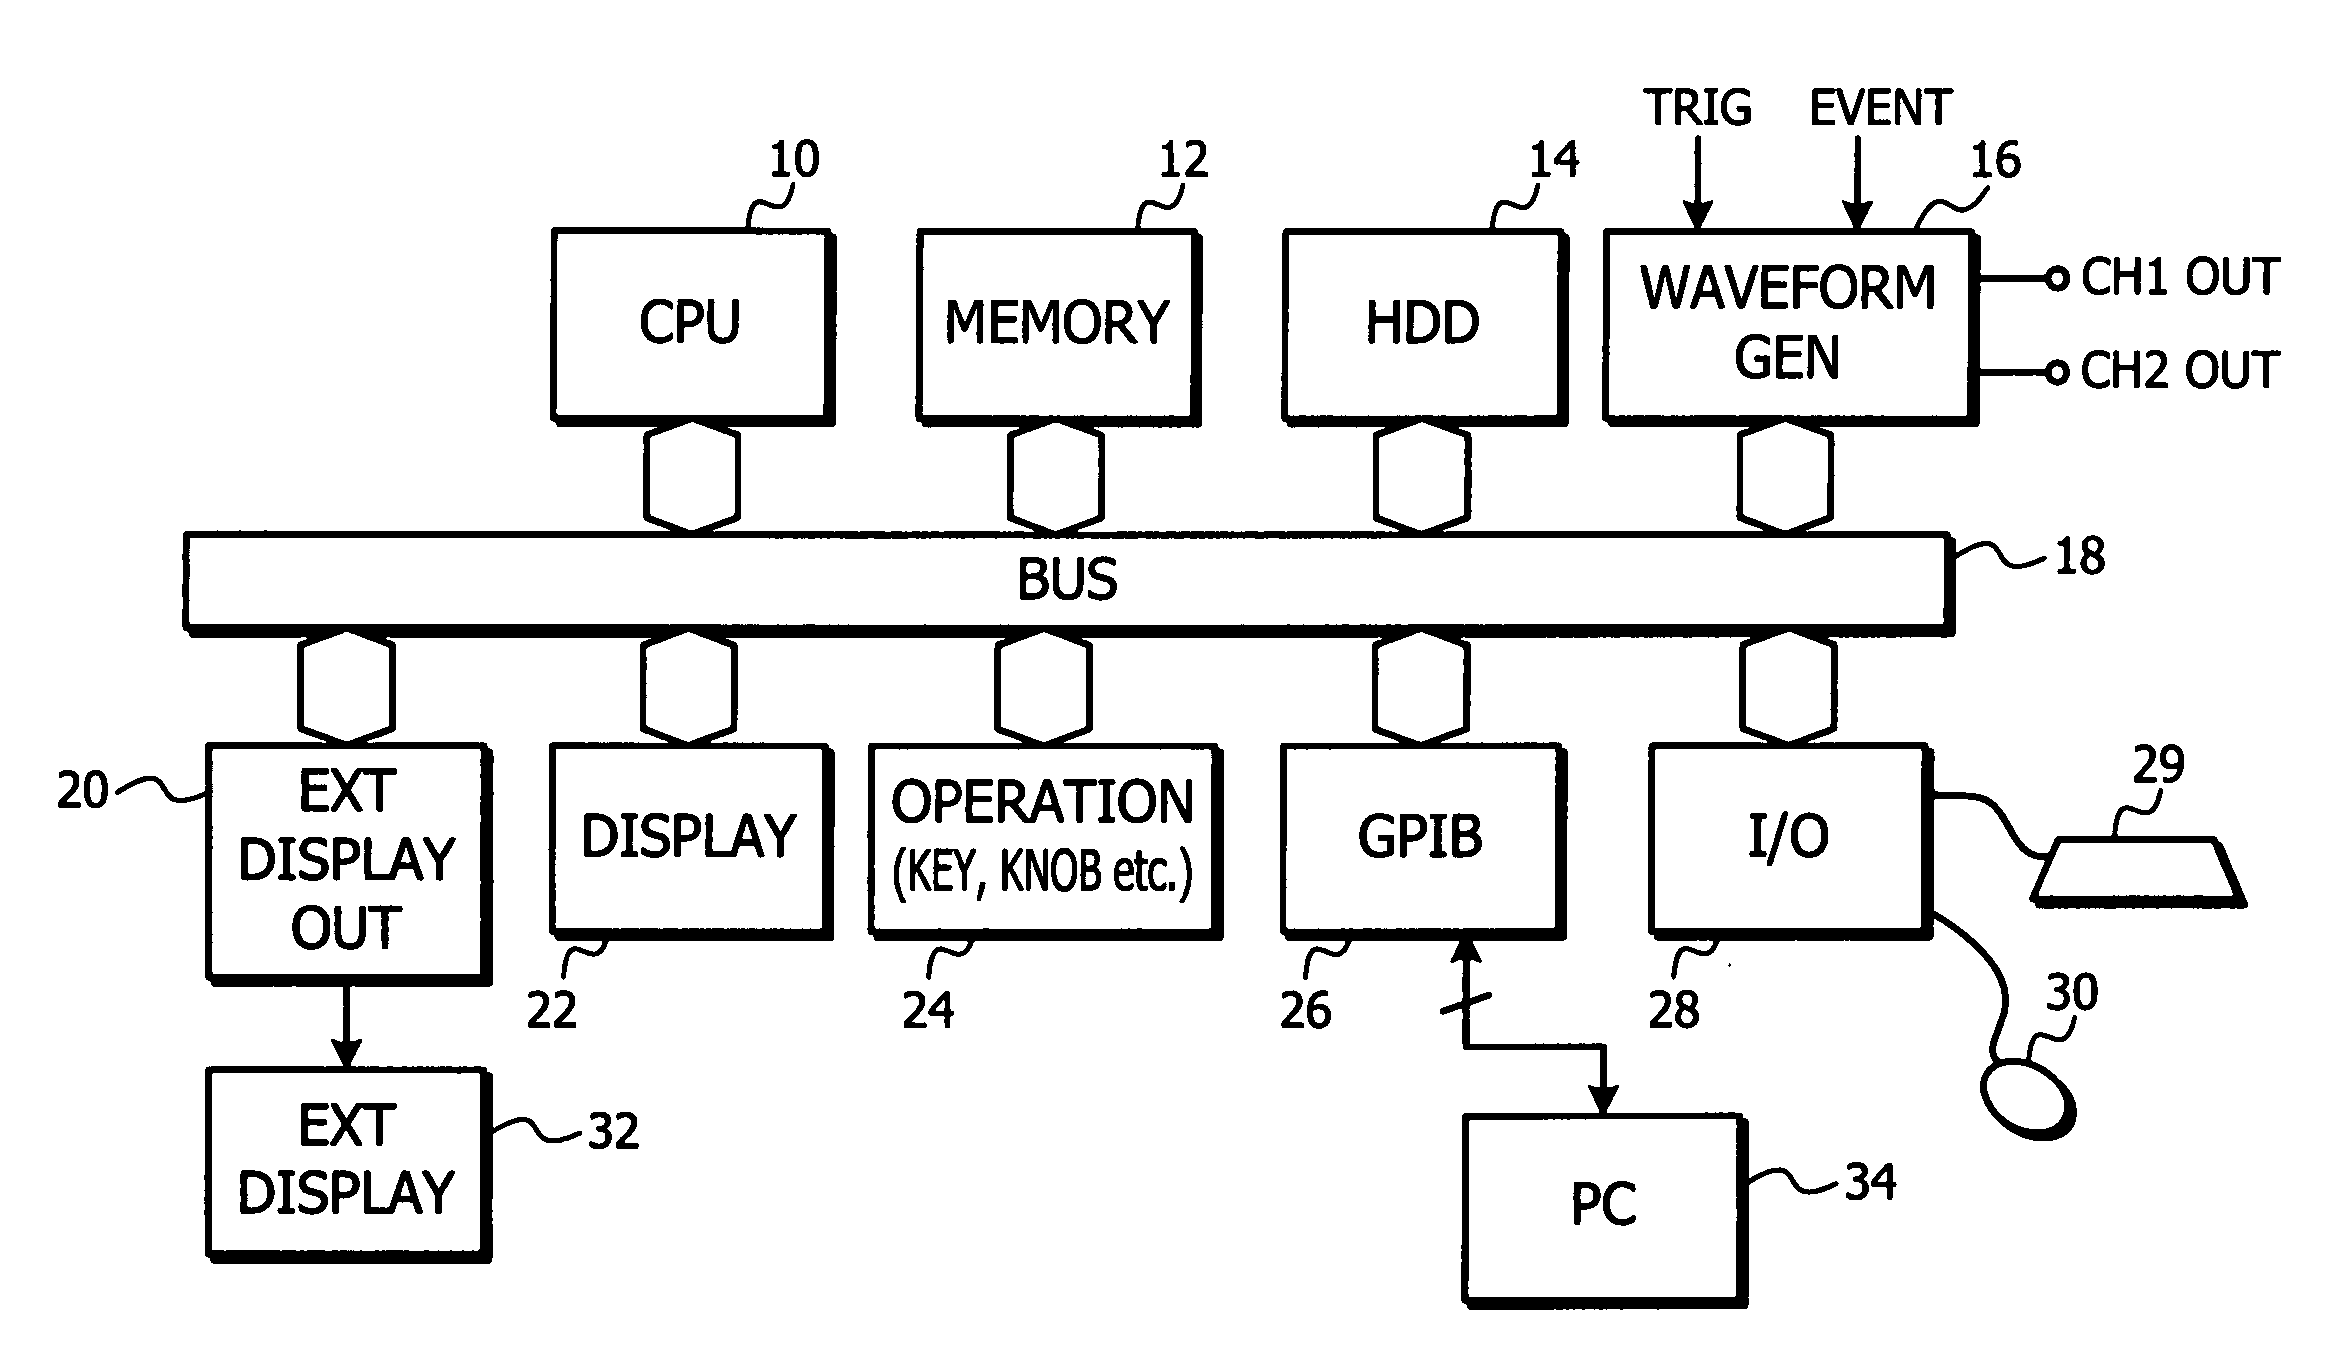 Command and argument description display corresponding to user actions on an electronic instrument